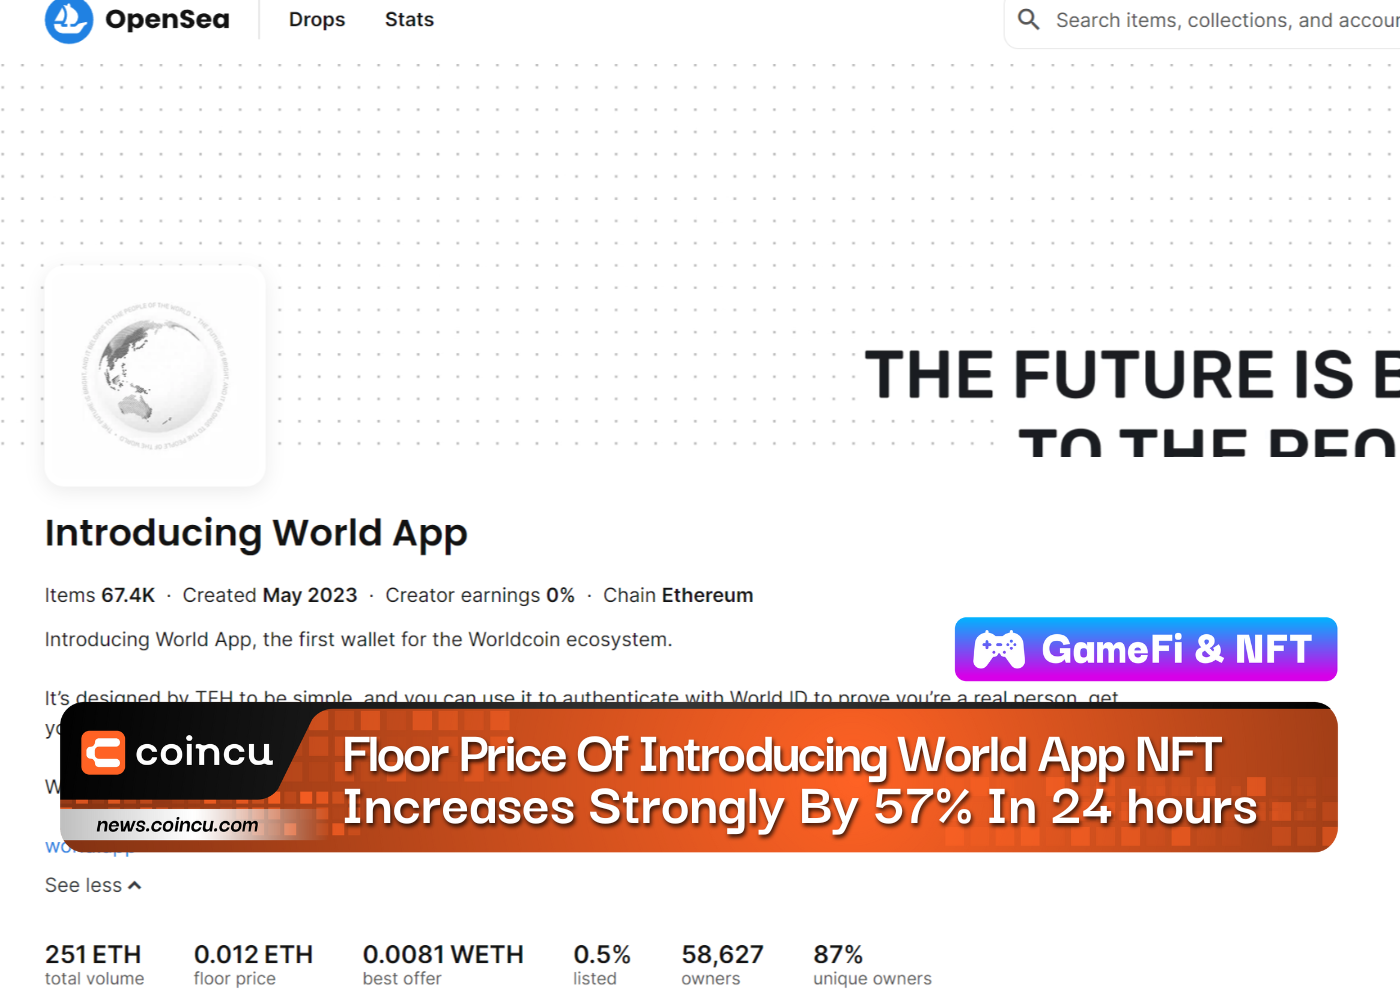 Floor Price Of Introducing World App NFT Increases Strongly By 57% In 24 hours